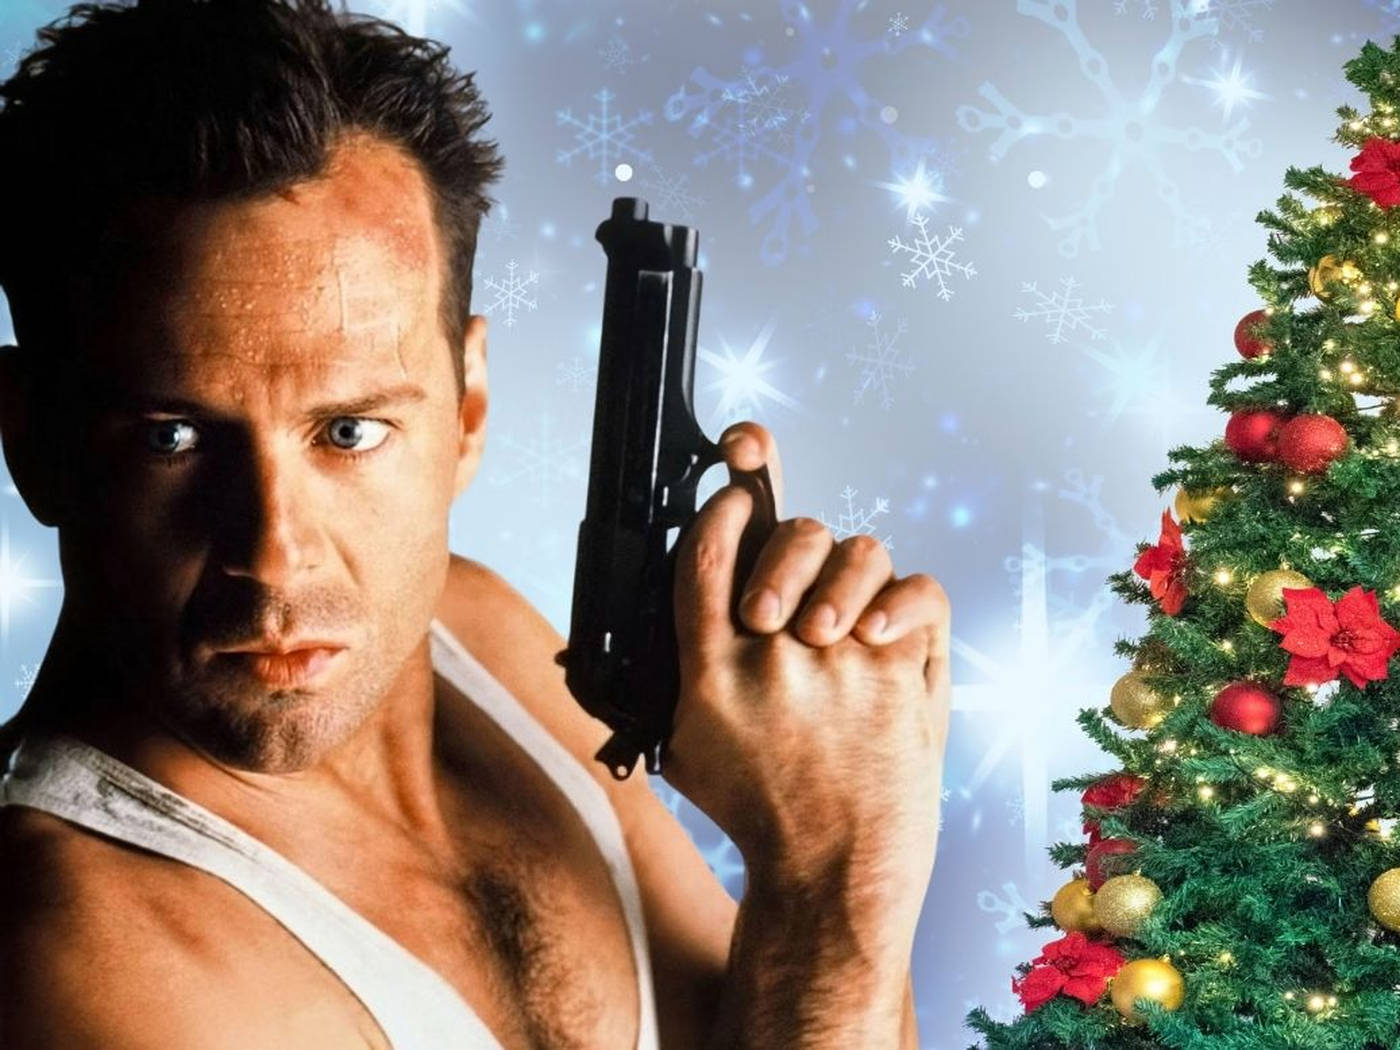 Die Hard' is a classic Christmas movie